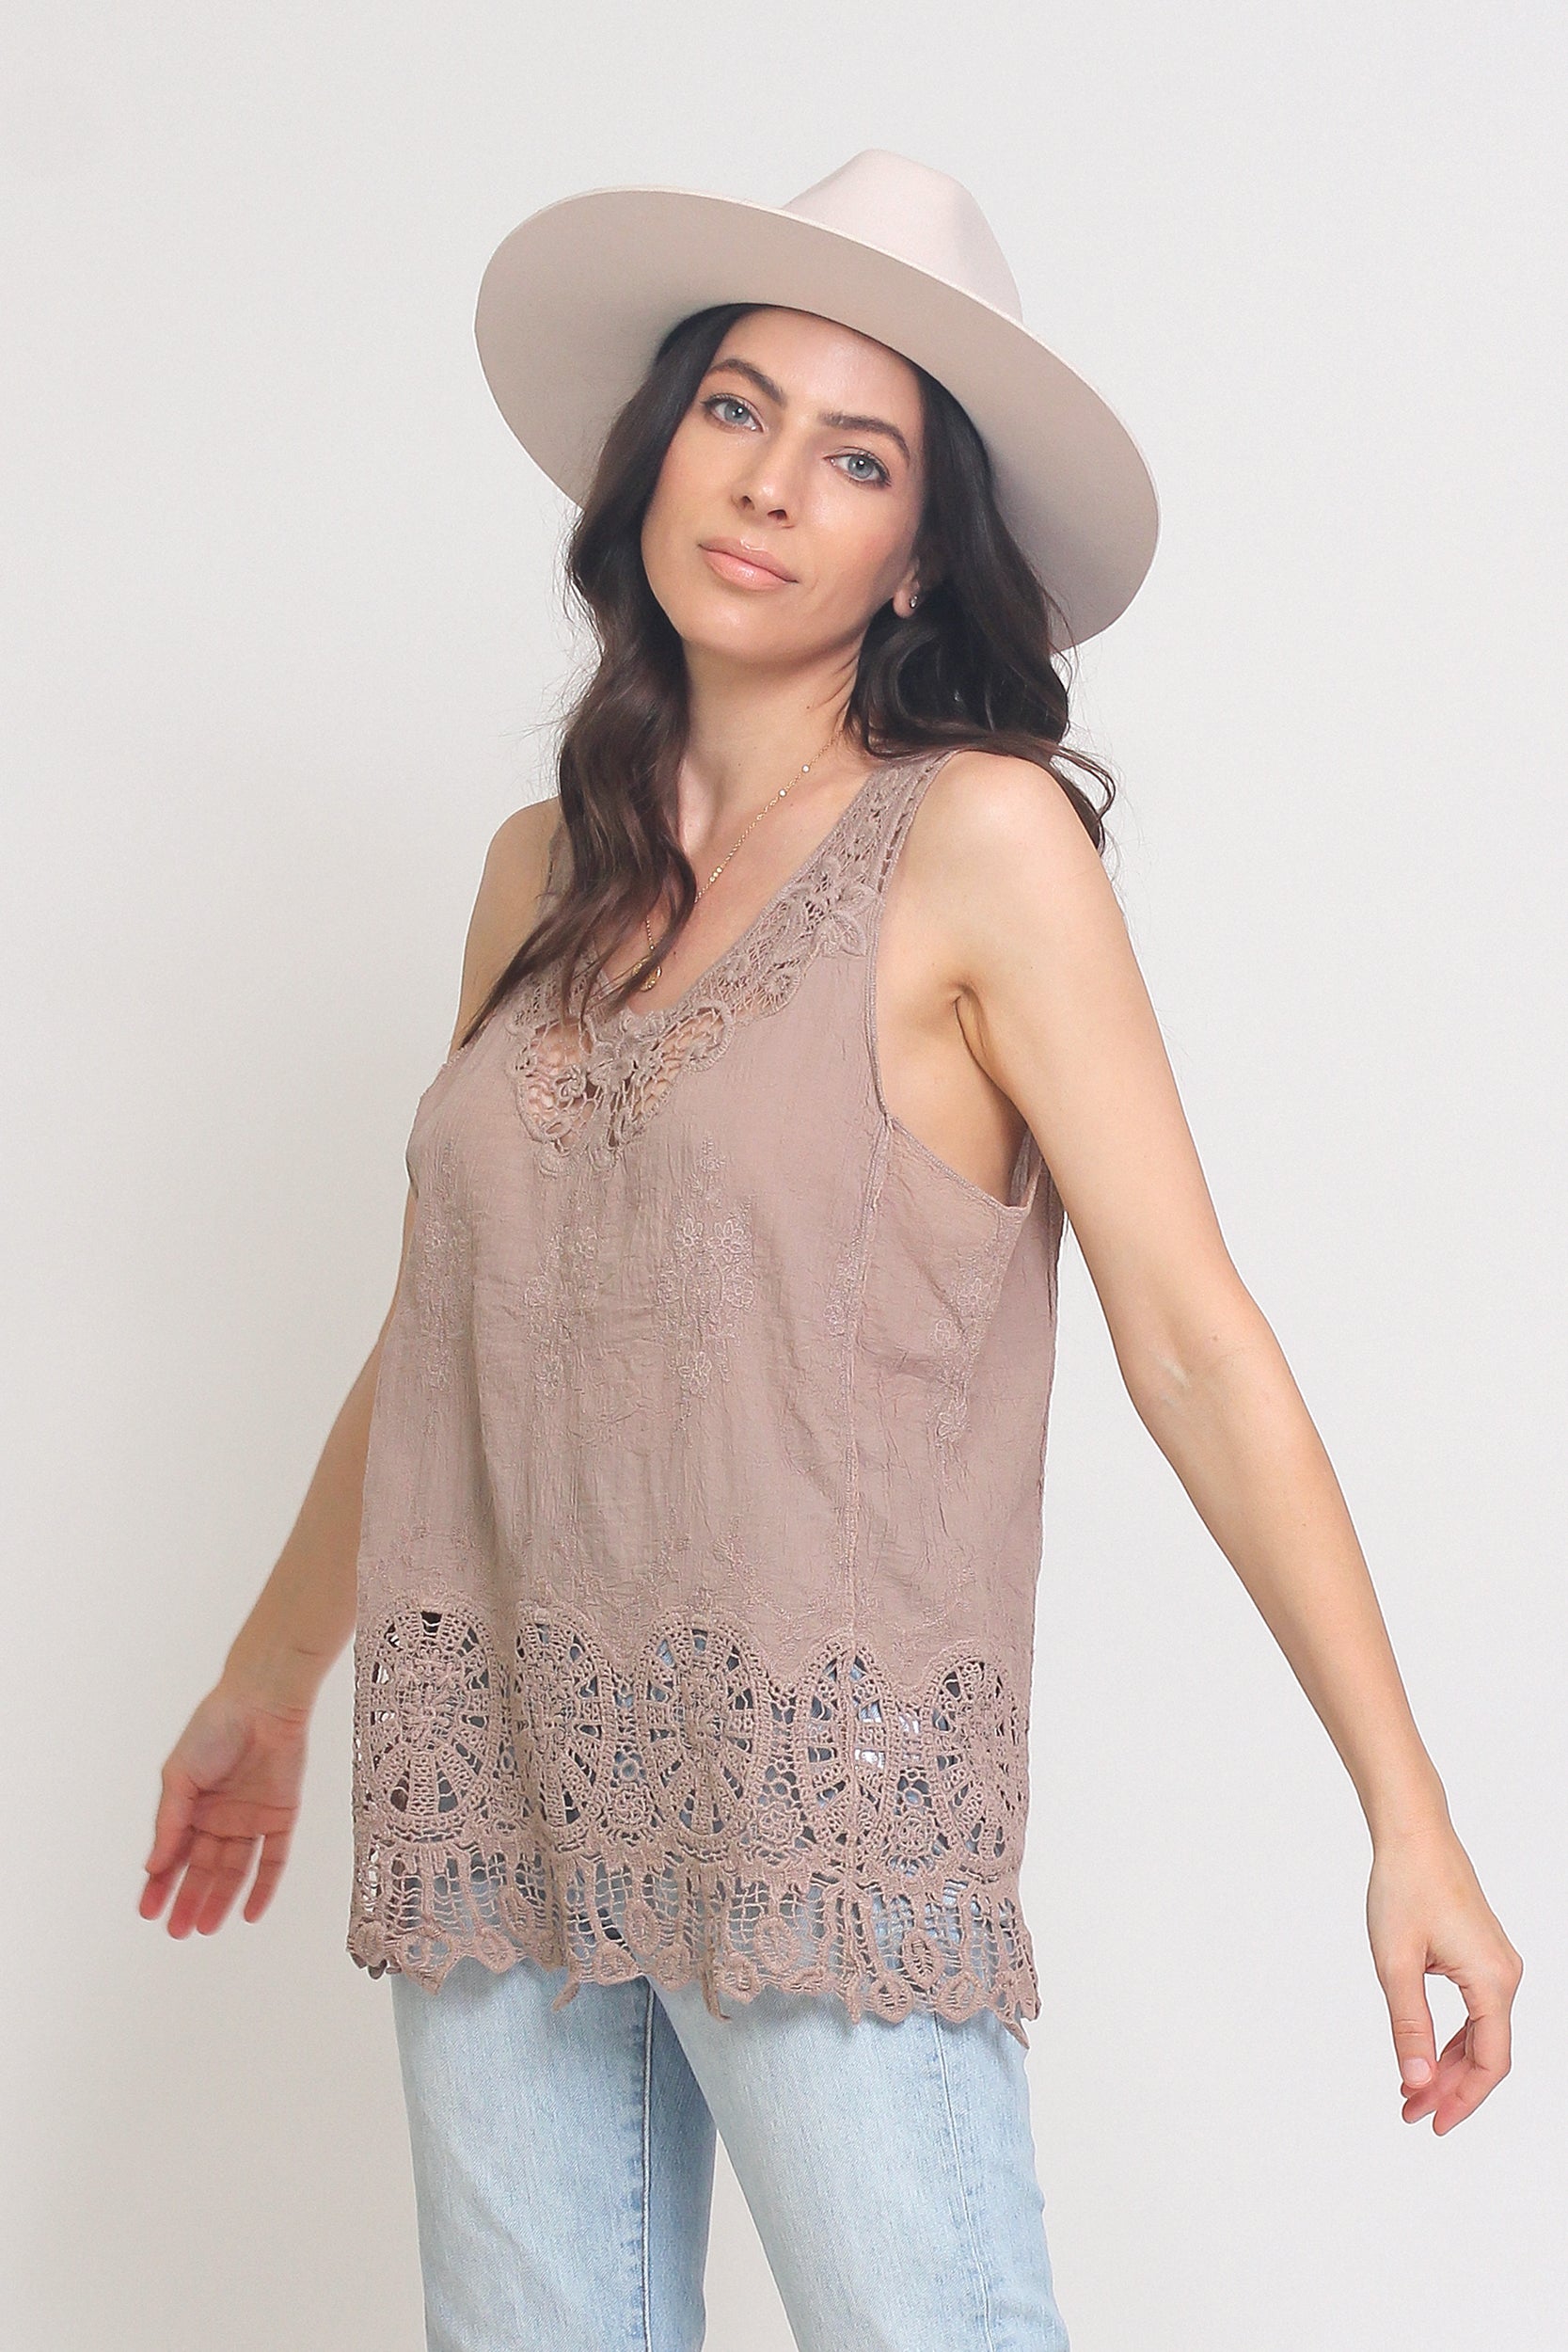 Embroidered top with crochet lace detail, in Mocha. Image 4